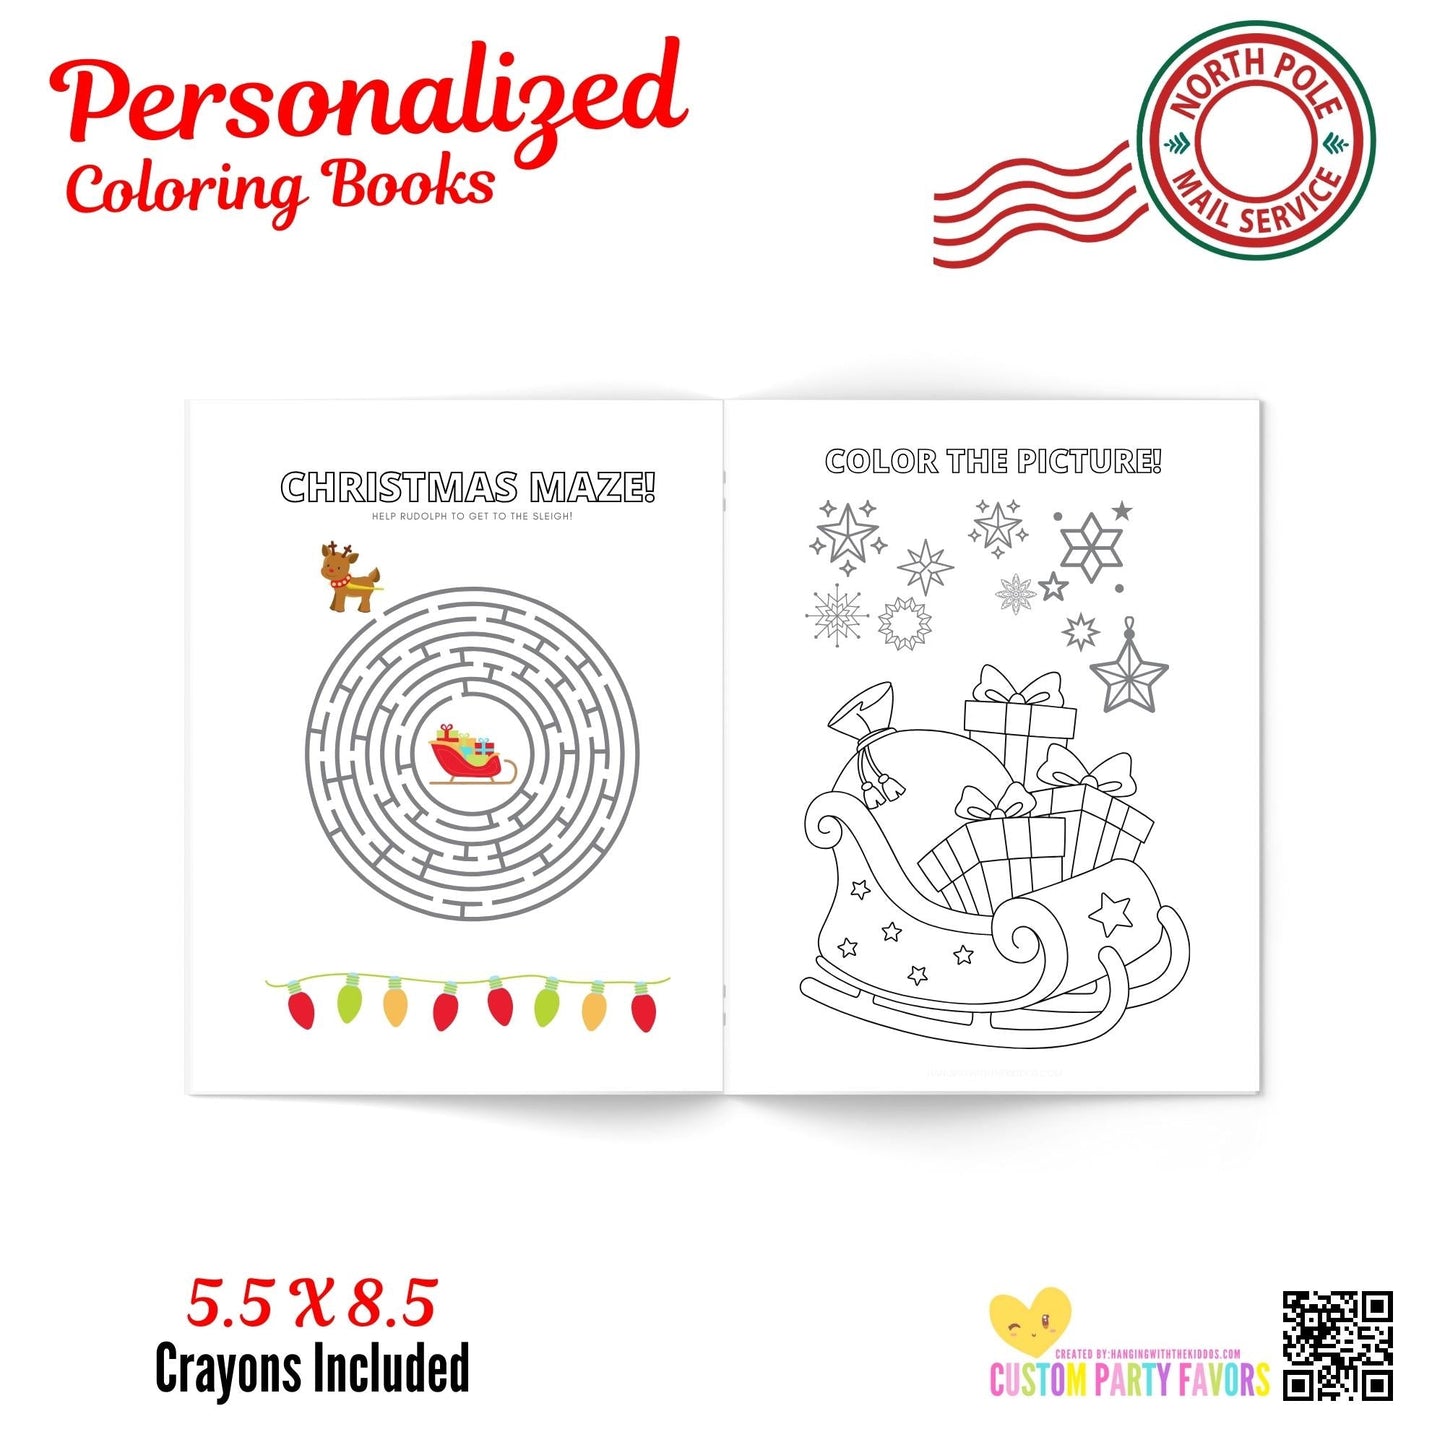 Personalized Christmas Coloring & Activity Books|04